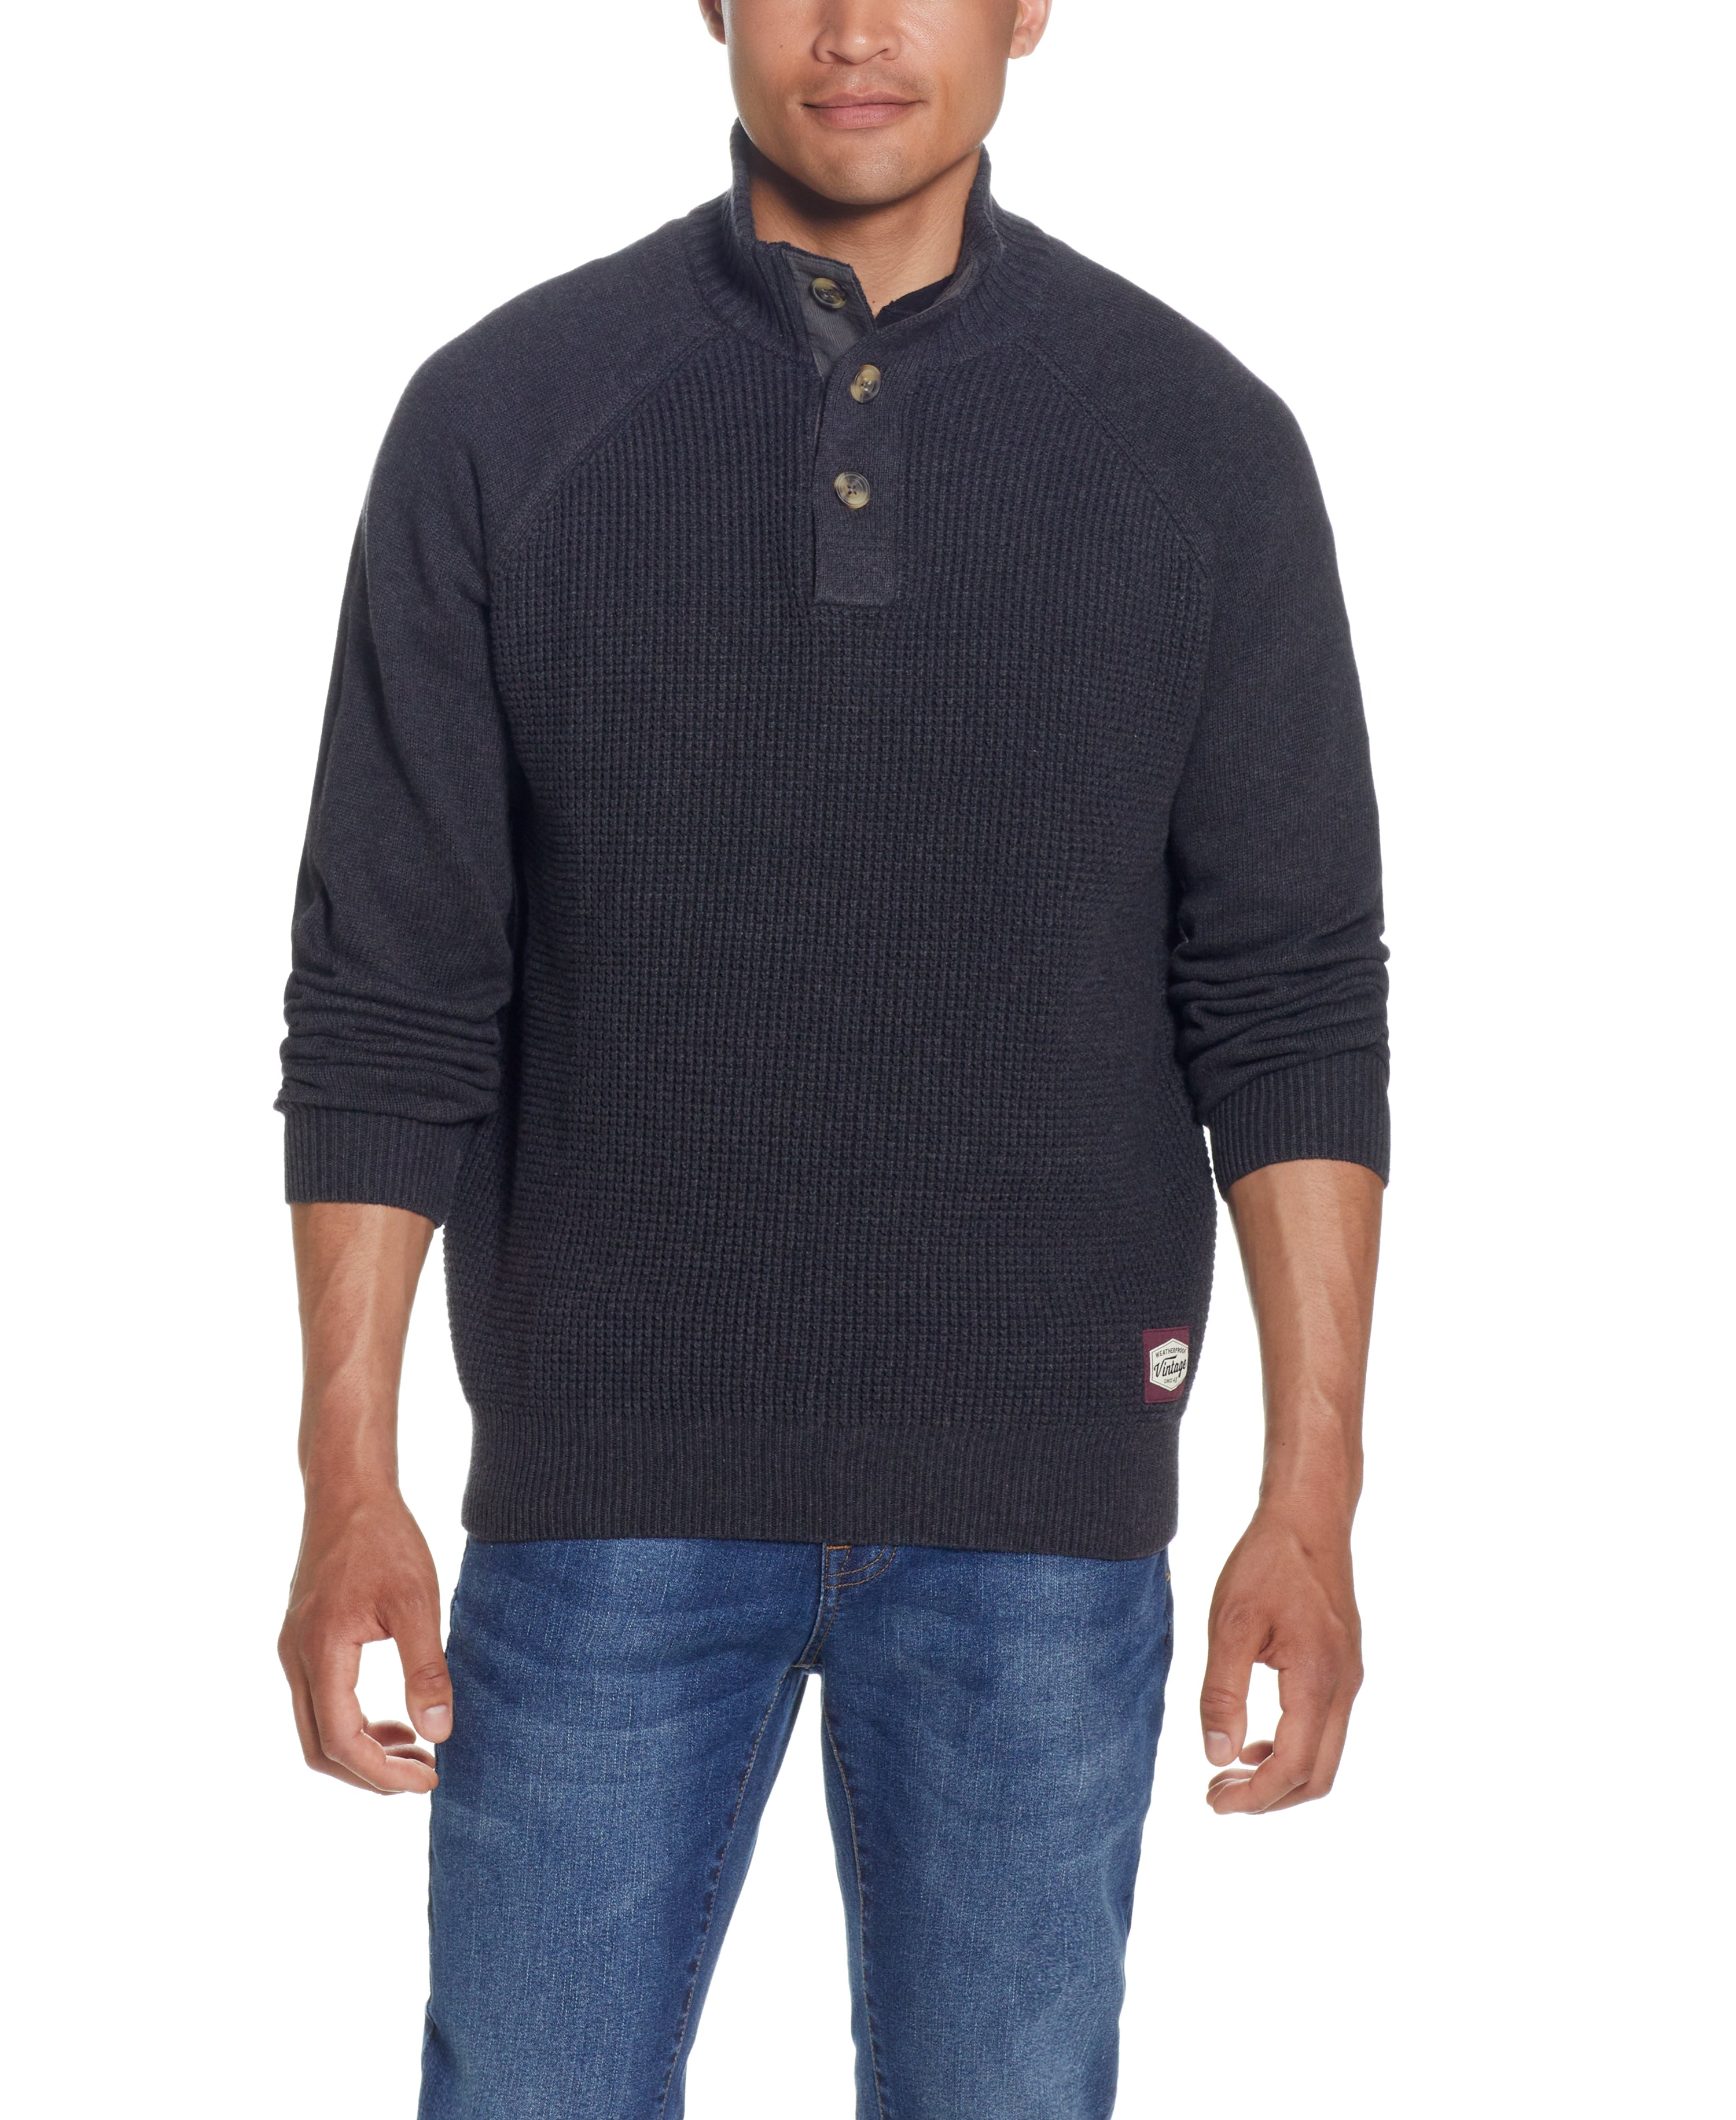 RAGLAN SLEEVES SHAKER STITCH BUTTONUP MOCK in CHAR HEATHER